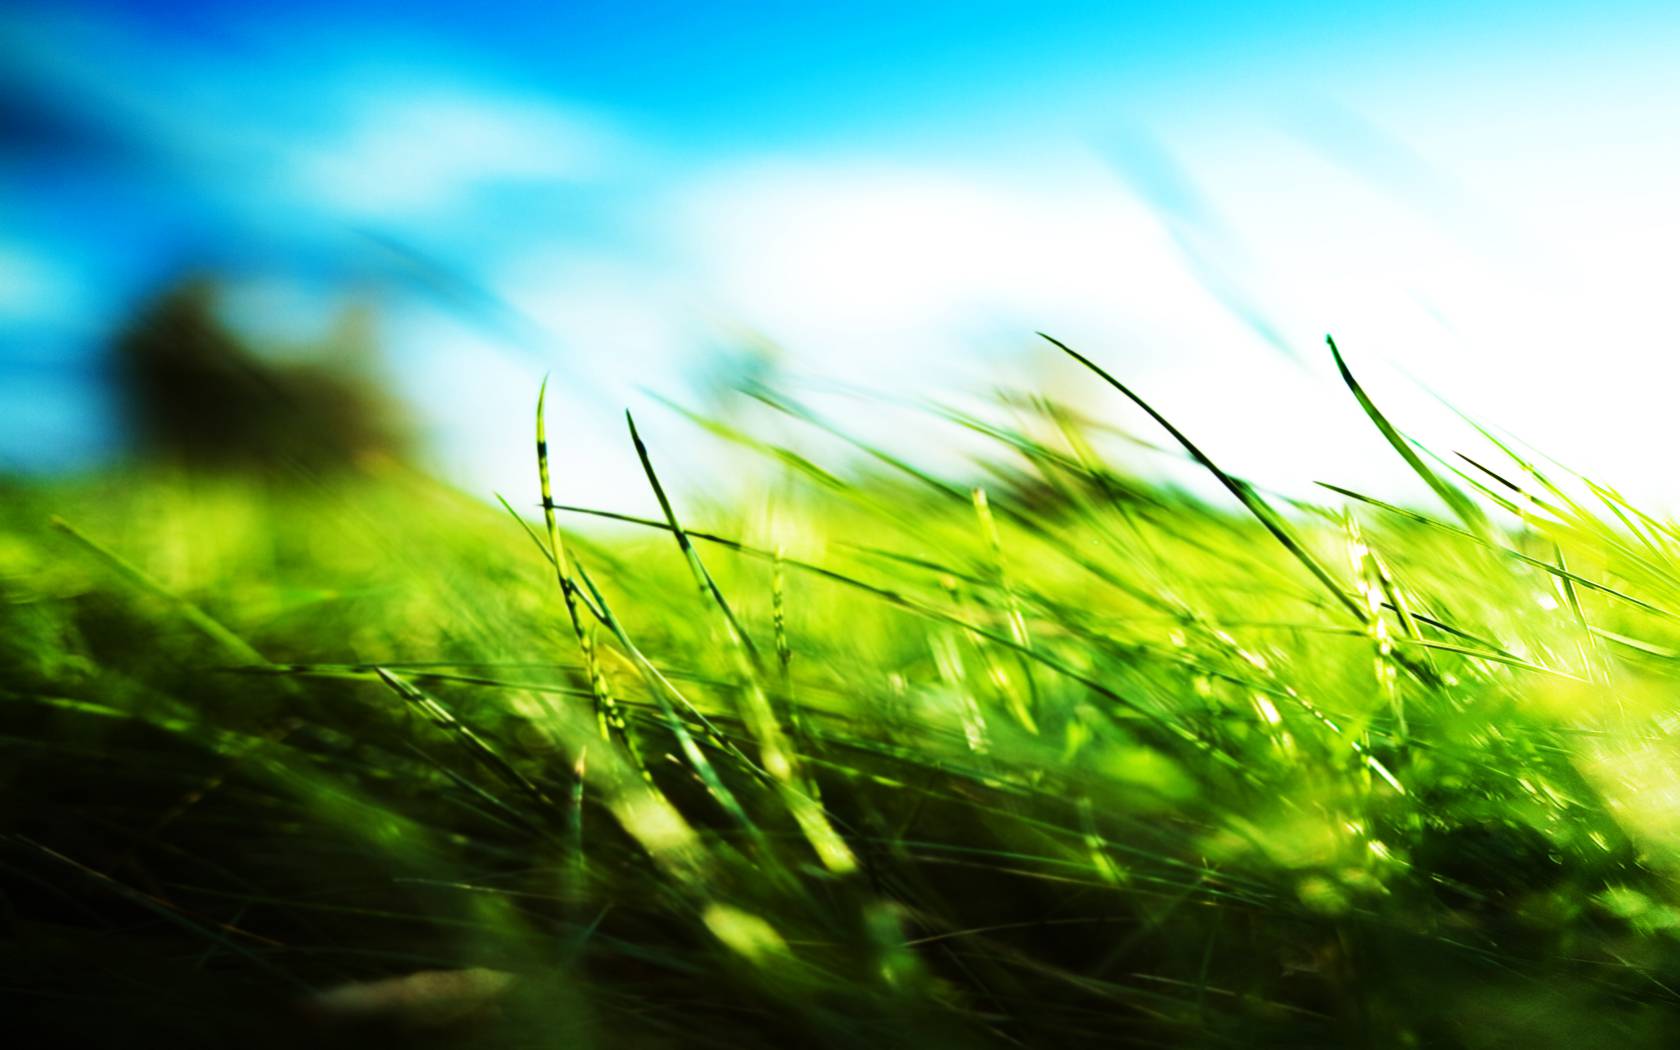 Green grass peace wallpaper - (#10021) - High Quality and ...